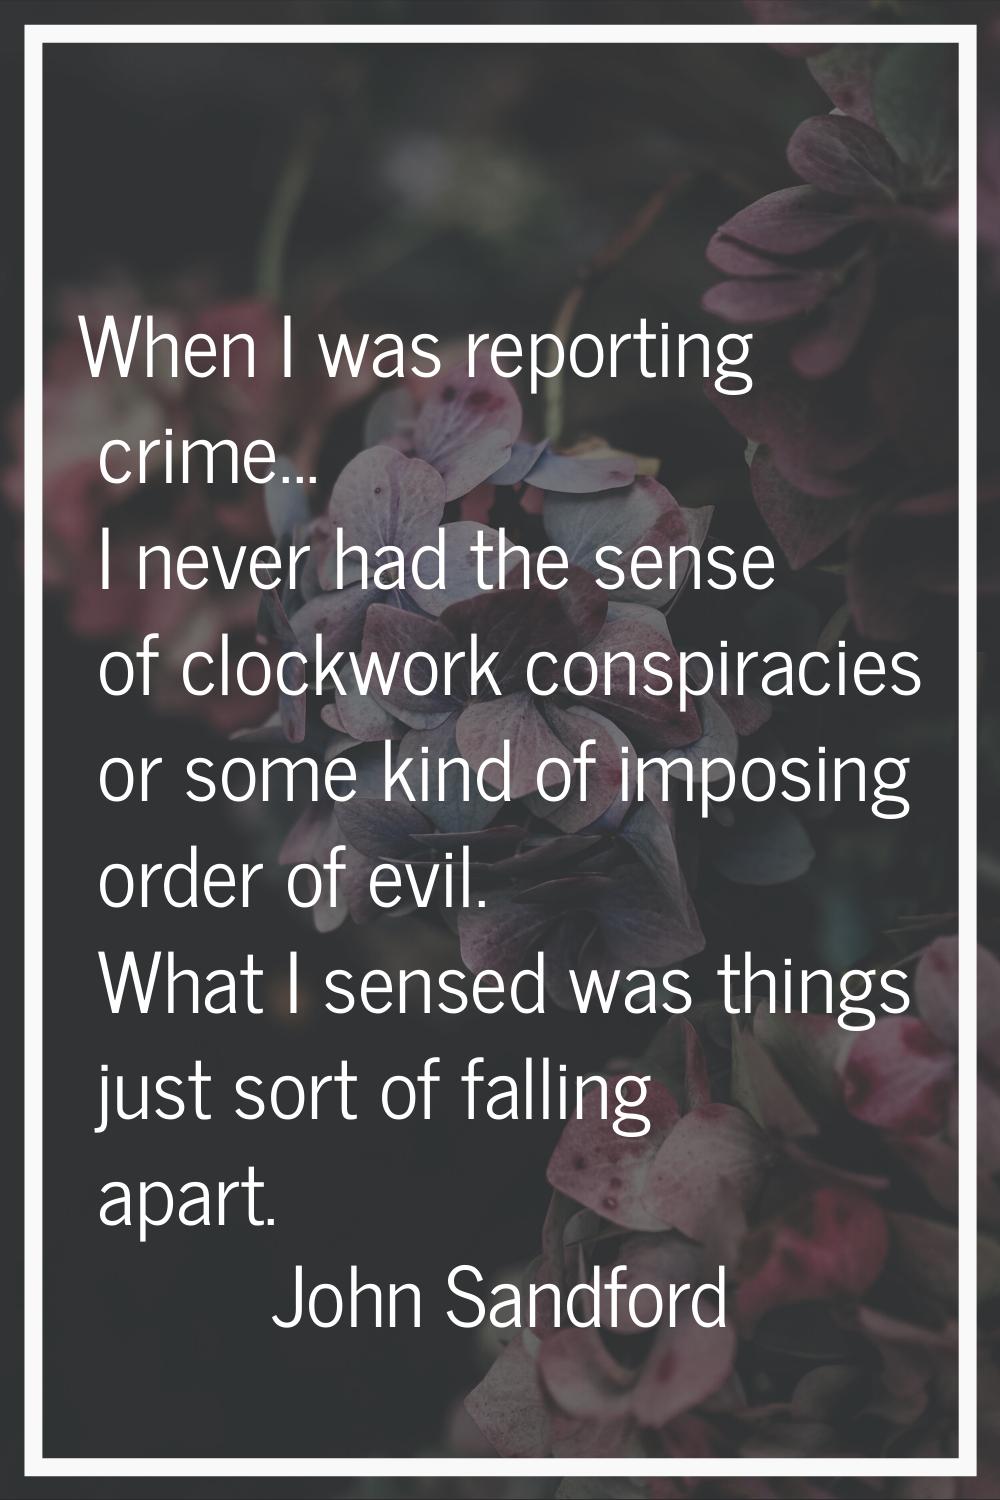 When I was reporting crime... I never had the sense of clockwork conspiracies or some kind of impos